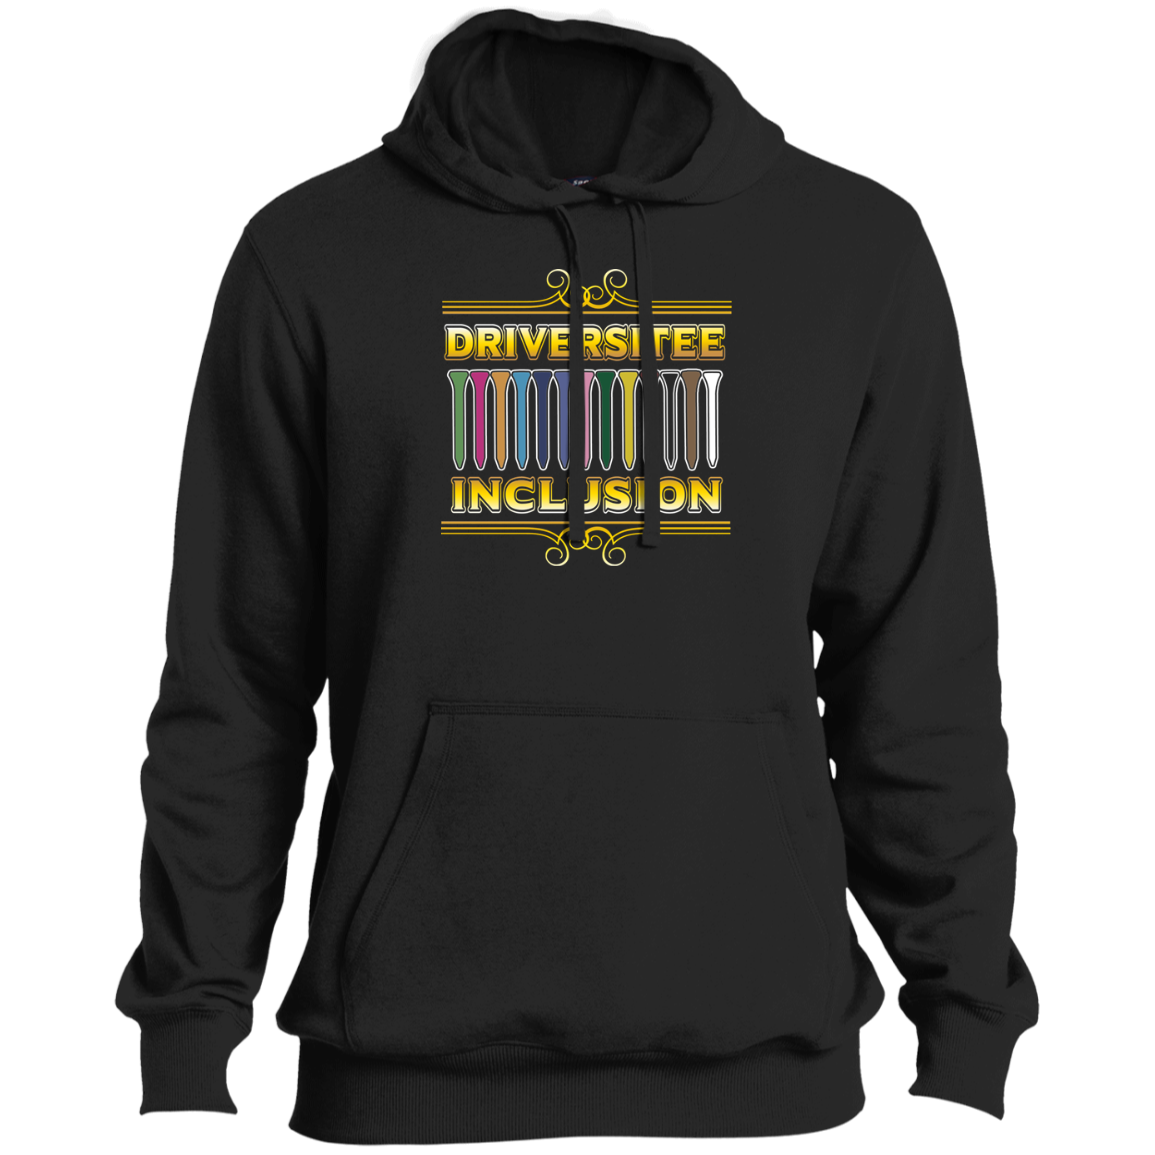 OPG Custom Design #6. Driveristee & Inclusion. Tall Pullover Hoodie